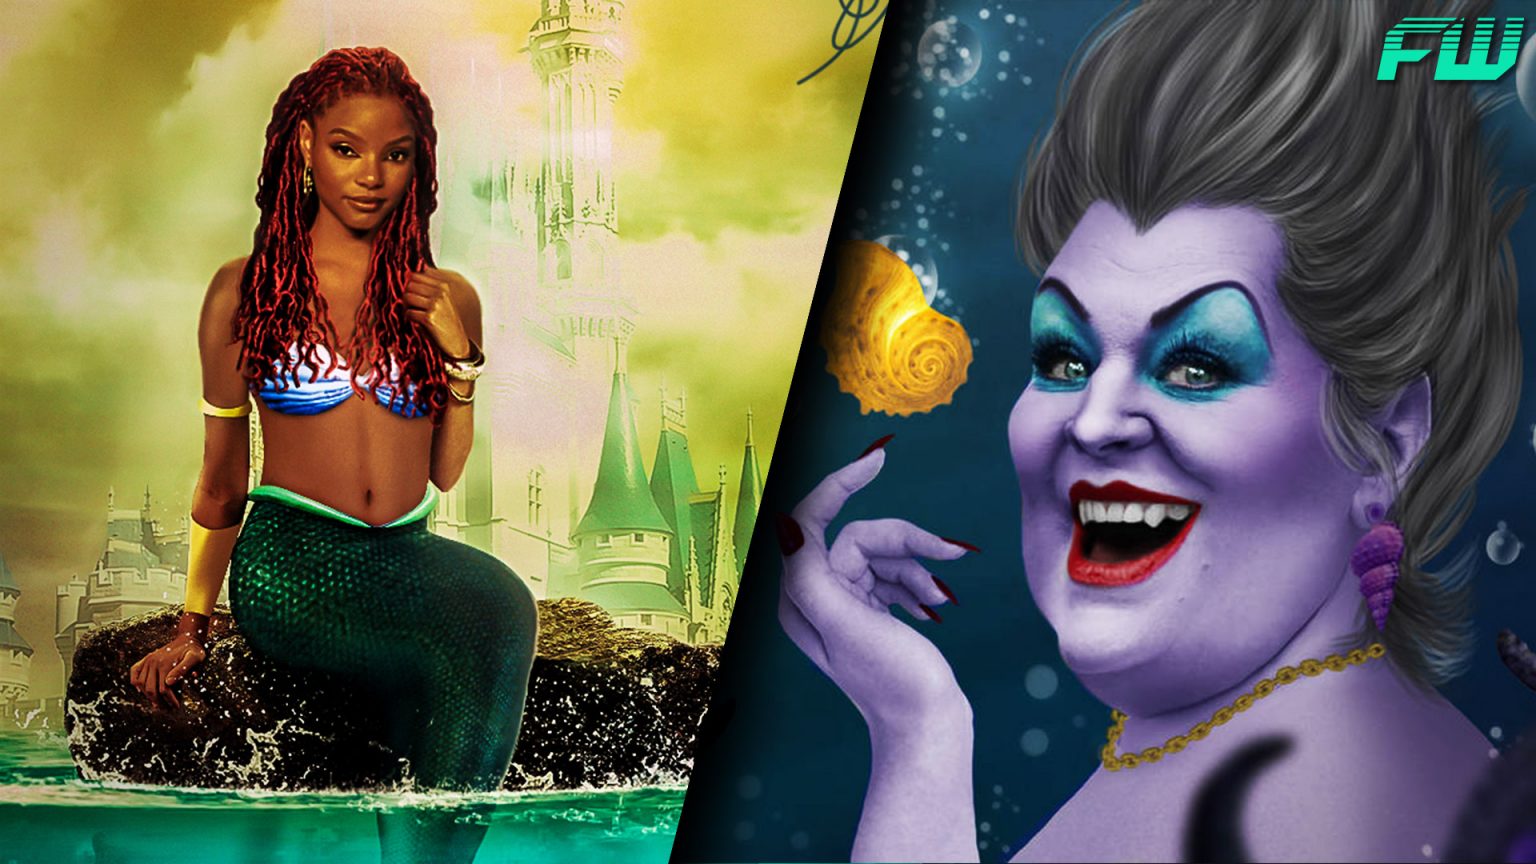 These Cast Members Of "Little Mermaid"Are Out And They Look Too Good To